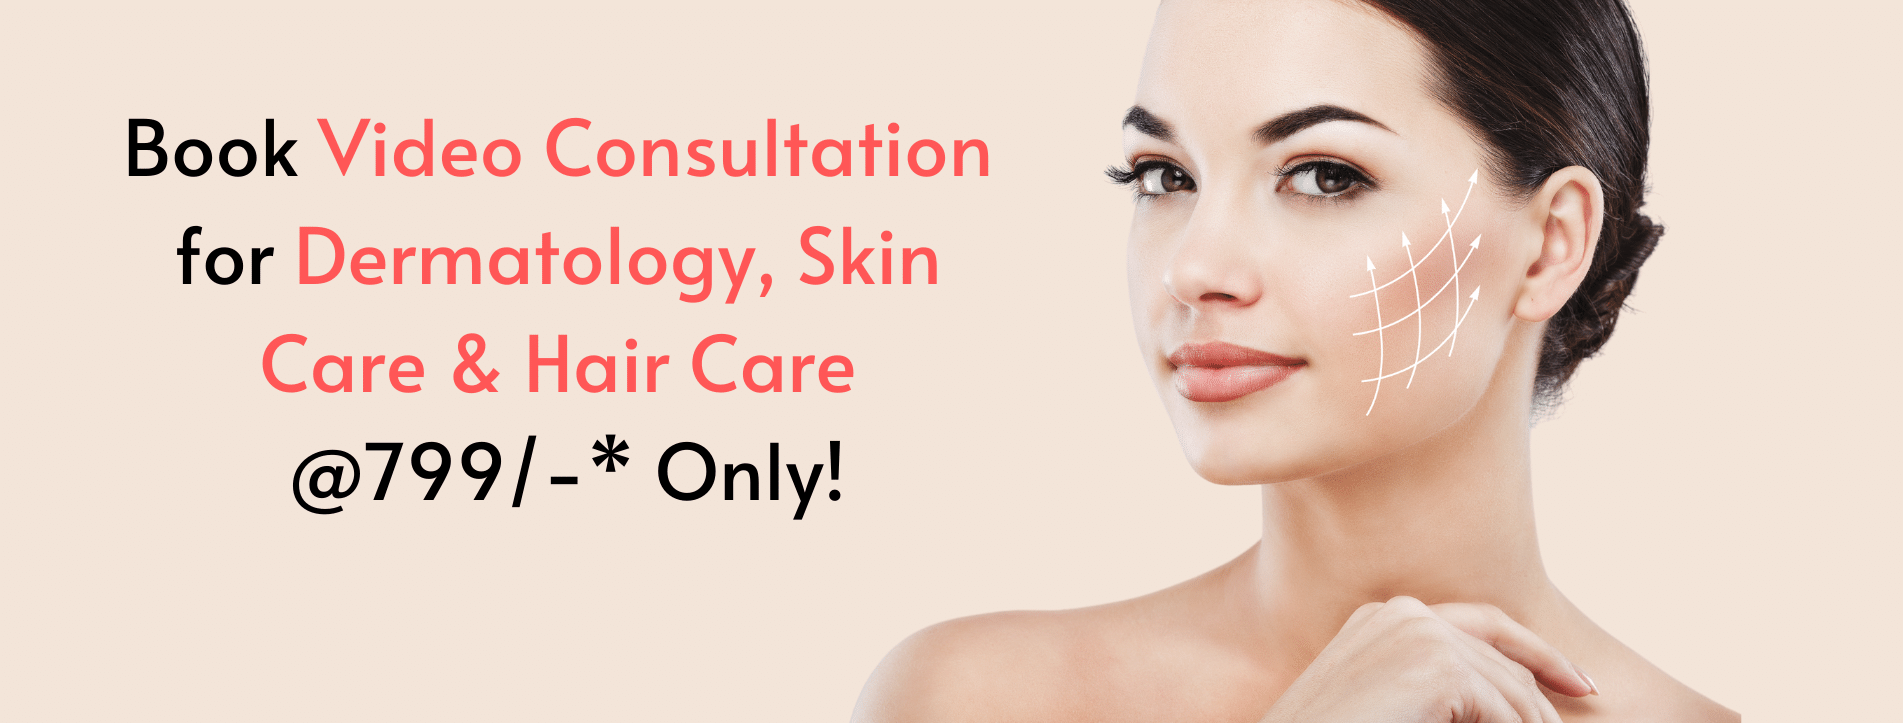 Hair Care Clinic with Online Doctor Consultation Mobile App  UpLabs